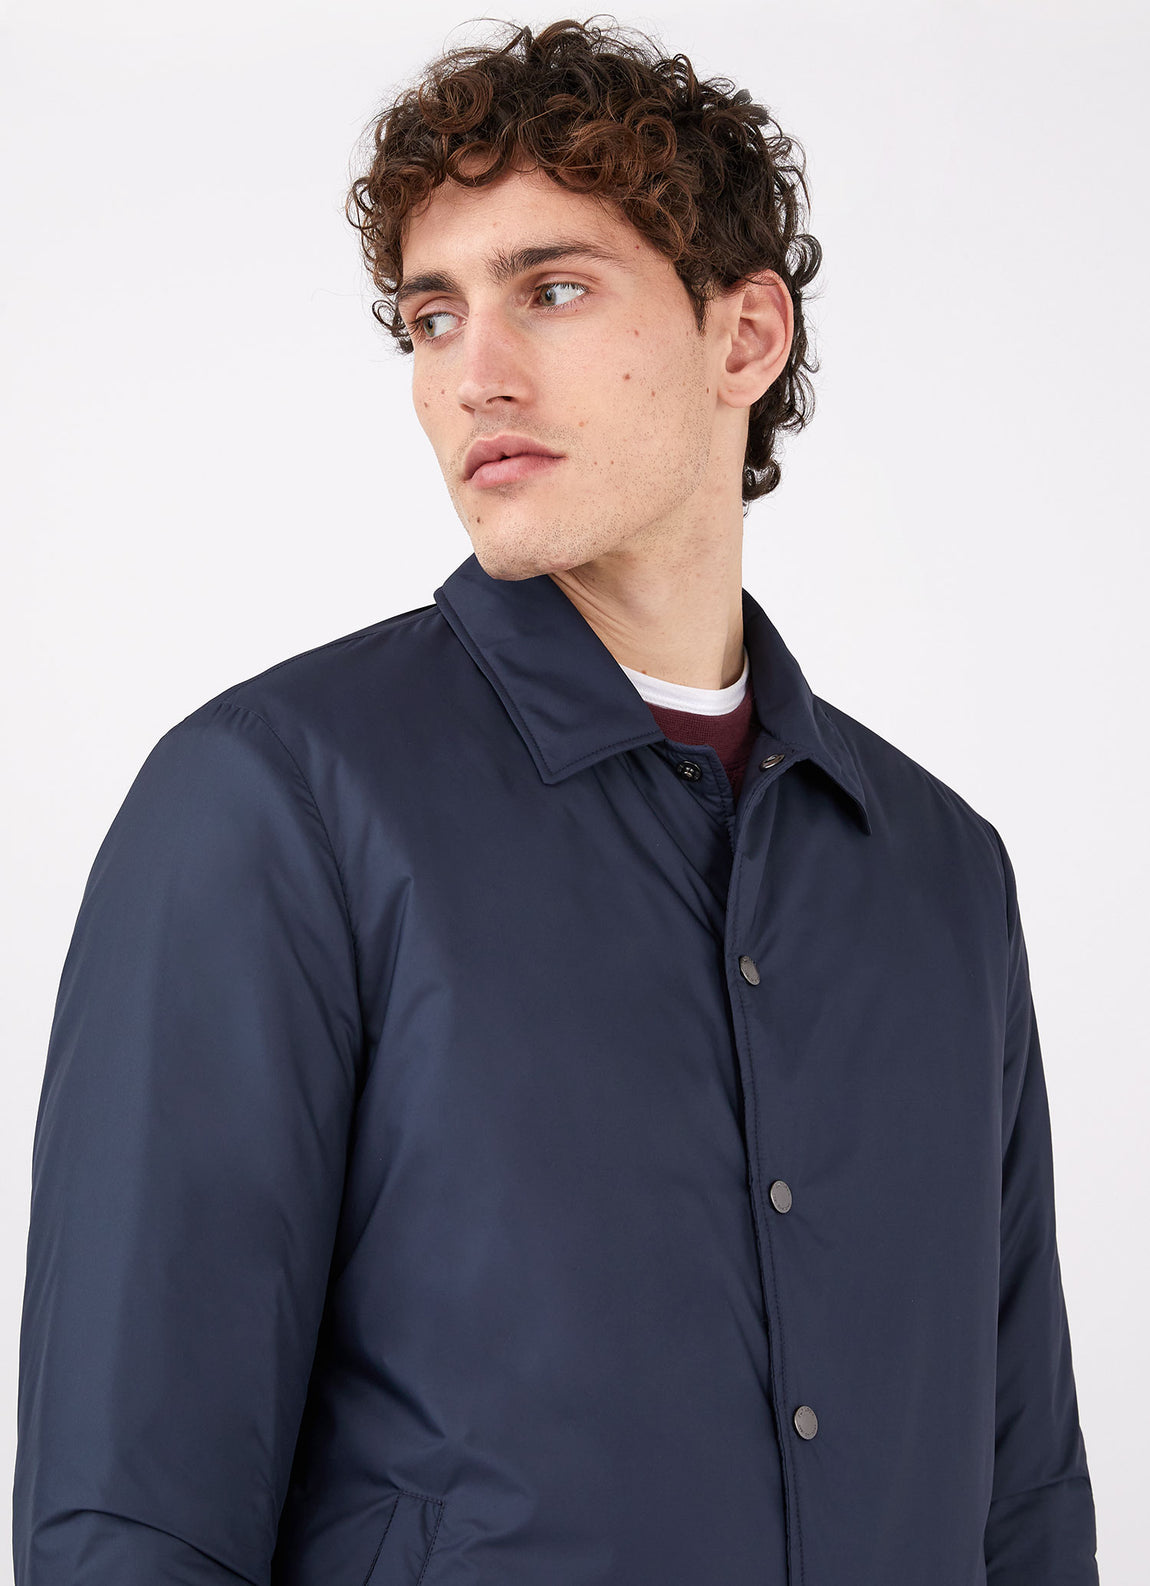 Insulated Coach Jacket in Navy | Sunspel